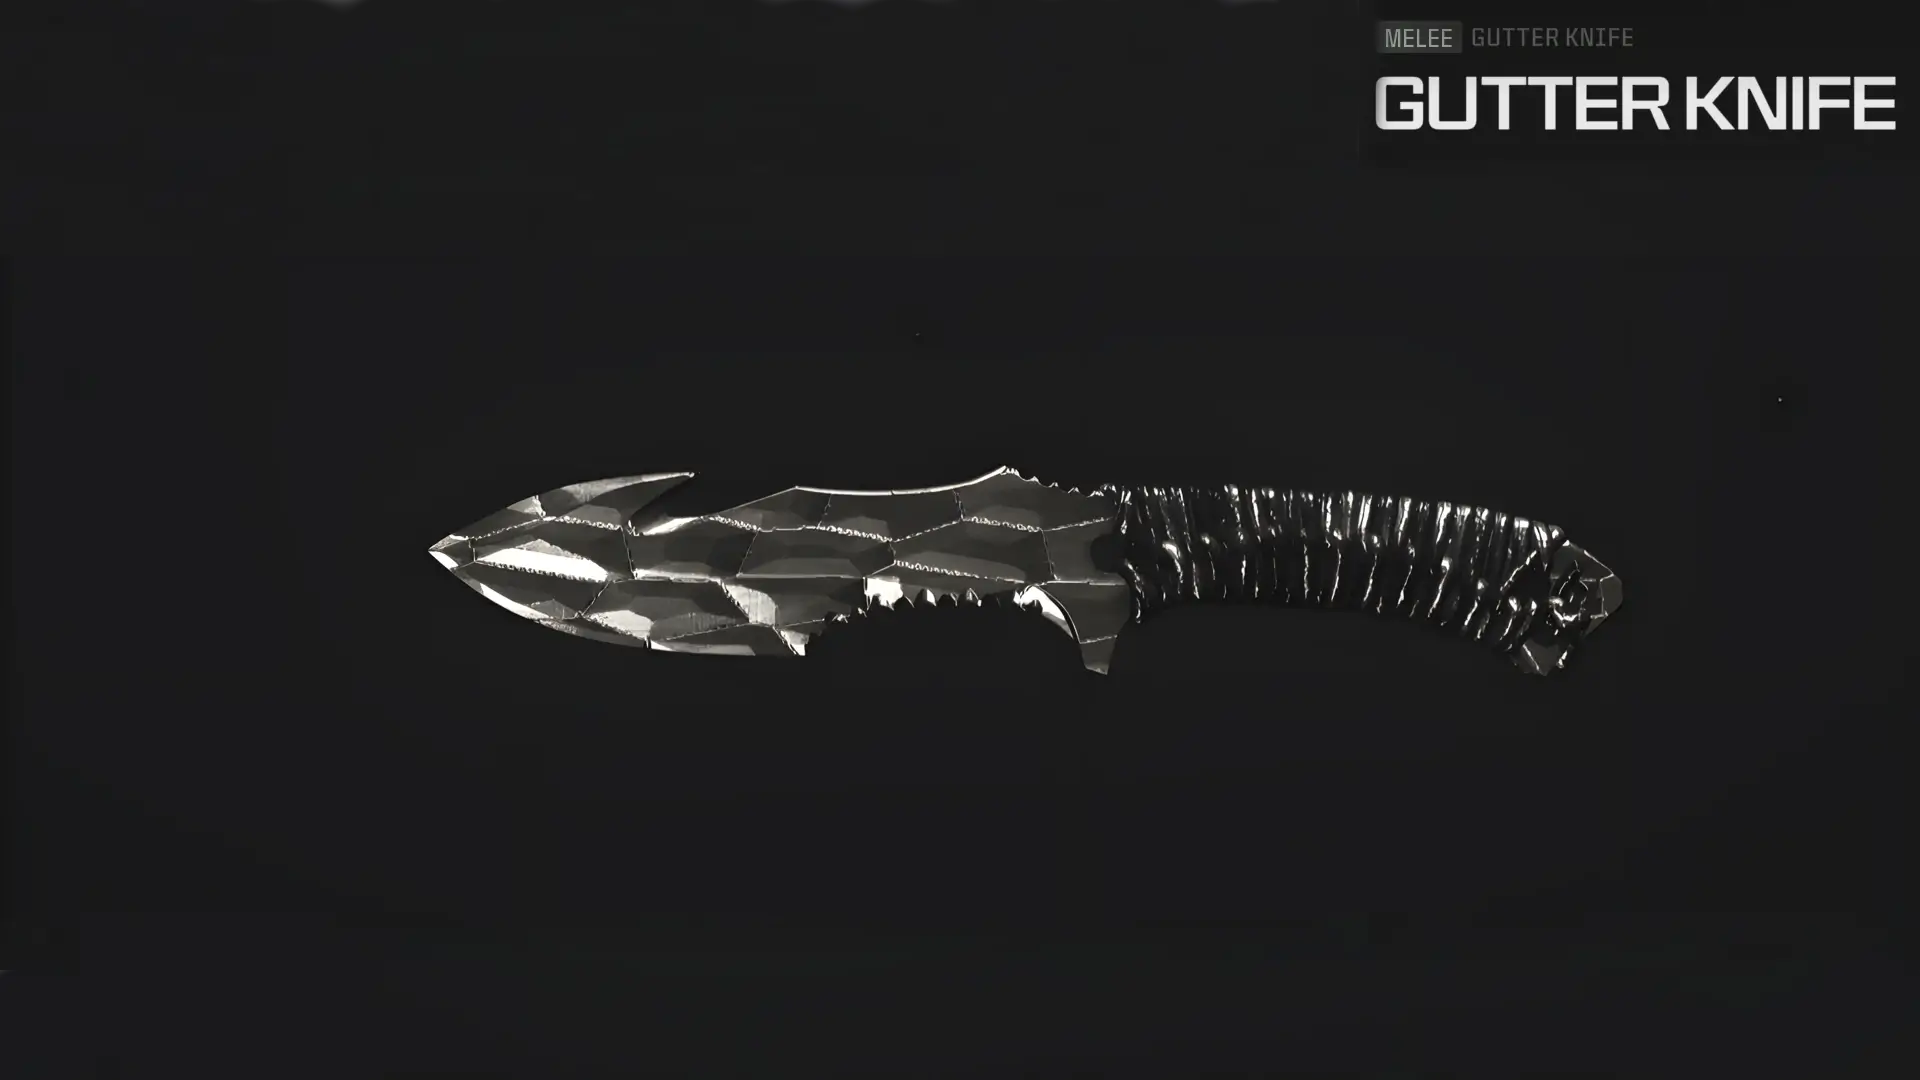 mw3 gutter knife forged camo